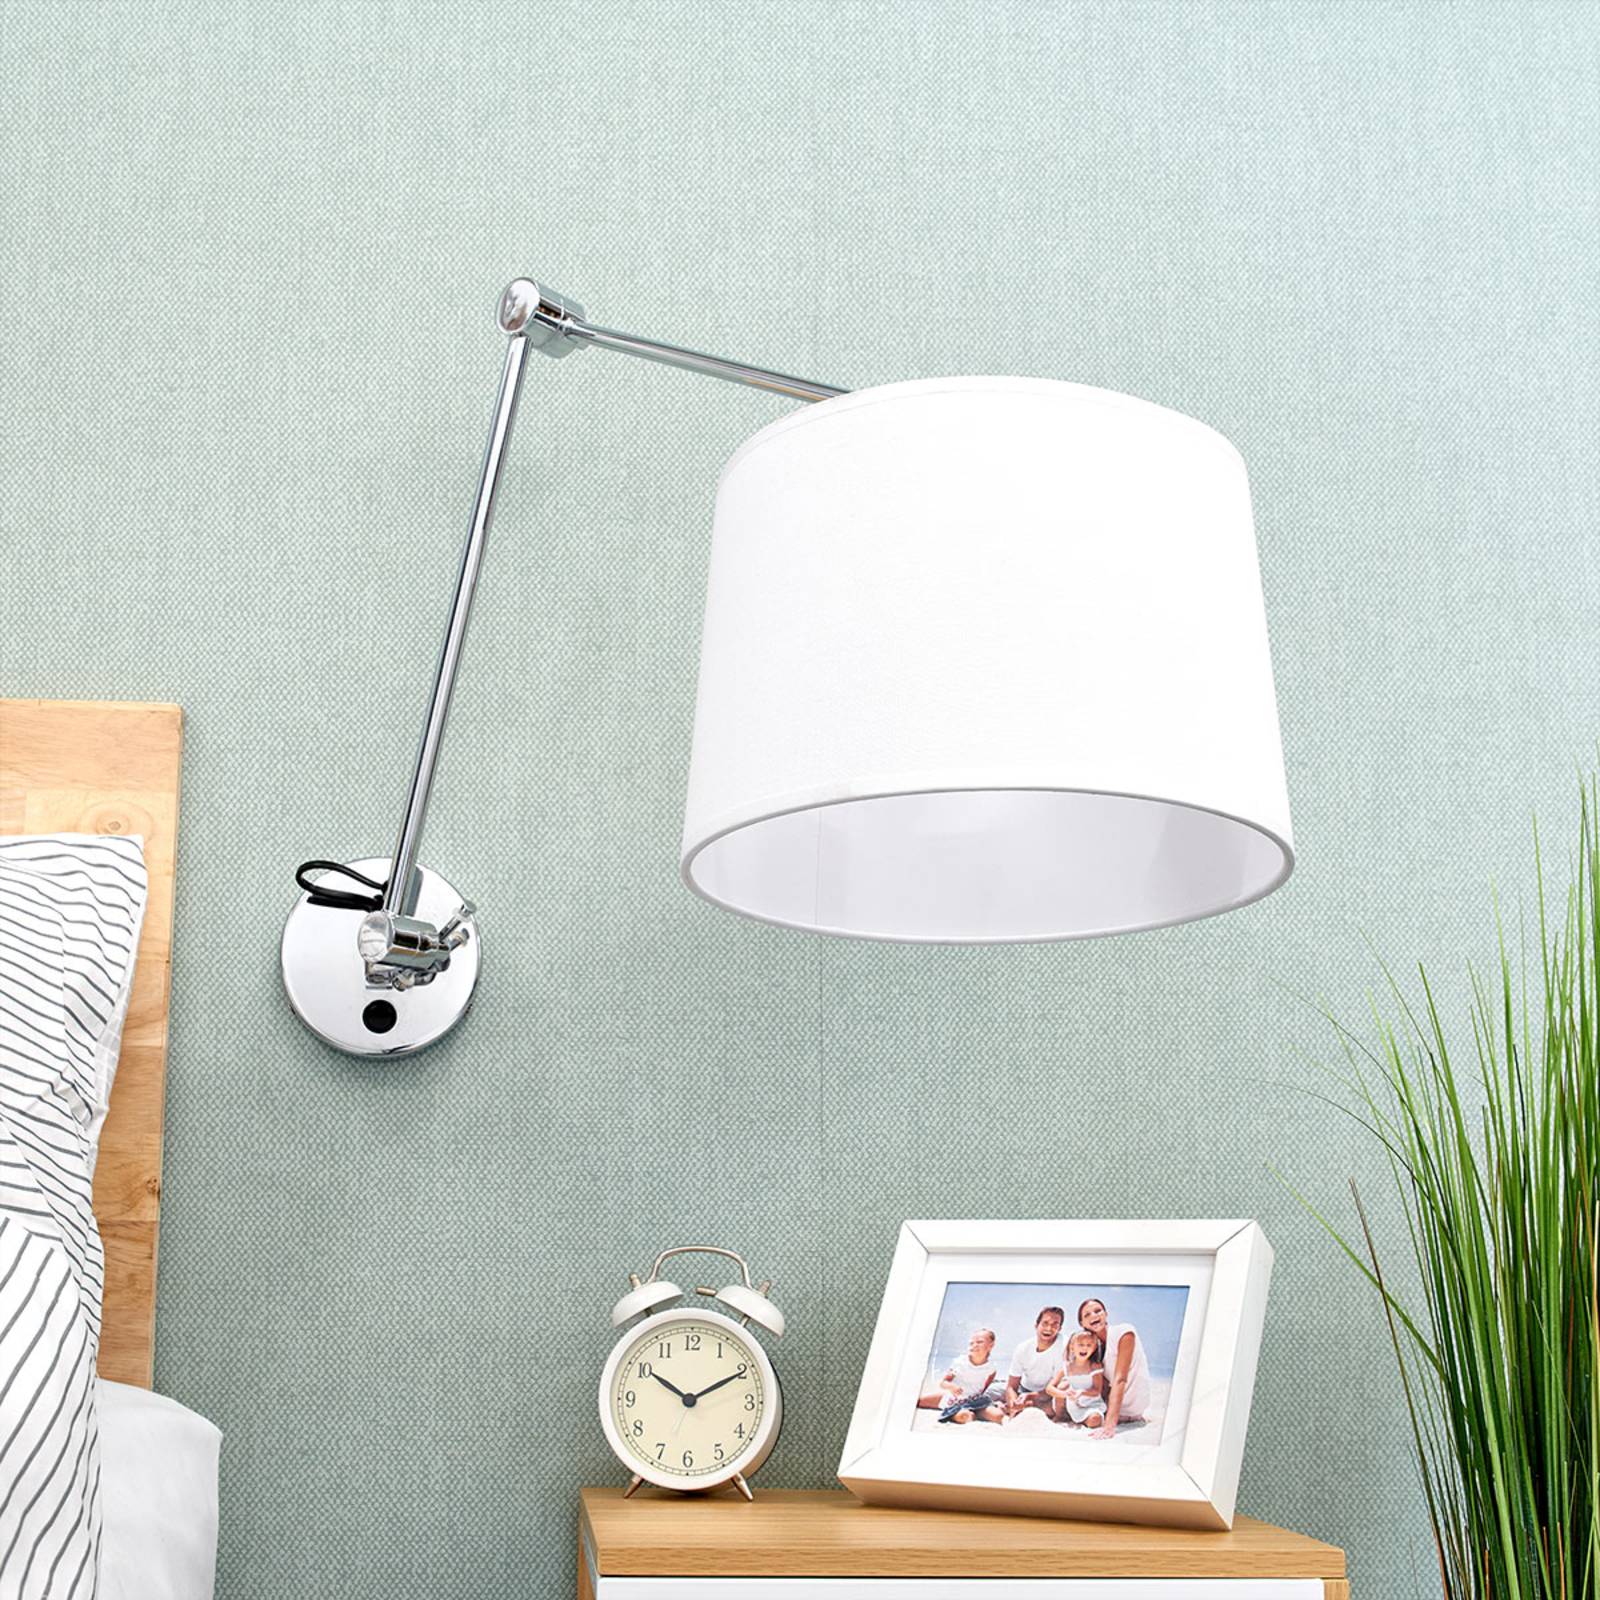 Photos - Chandelier / Lamp Lucande Fabric wall light Jolla, cantilever arm and switch 